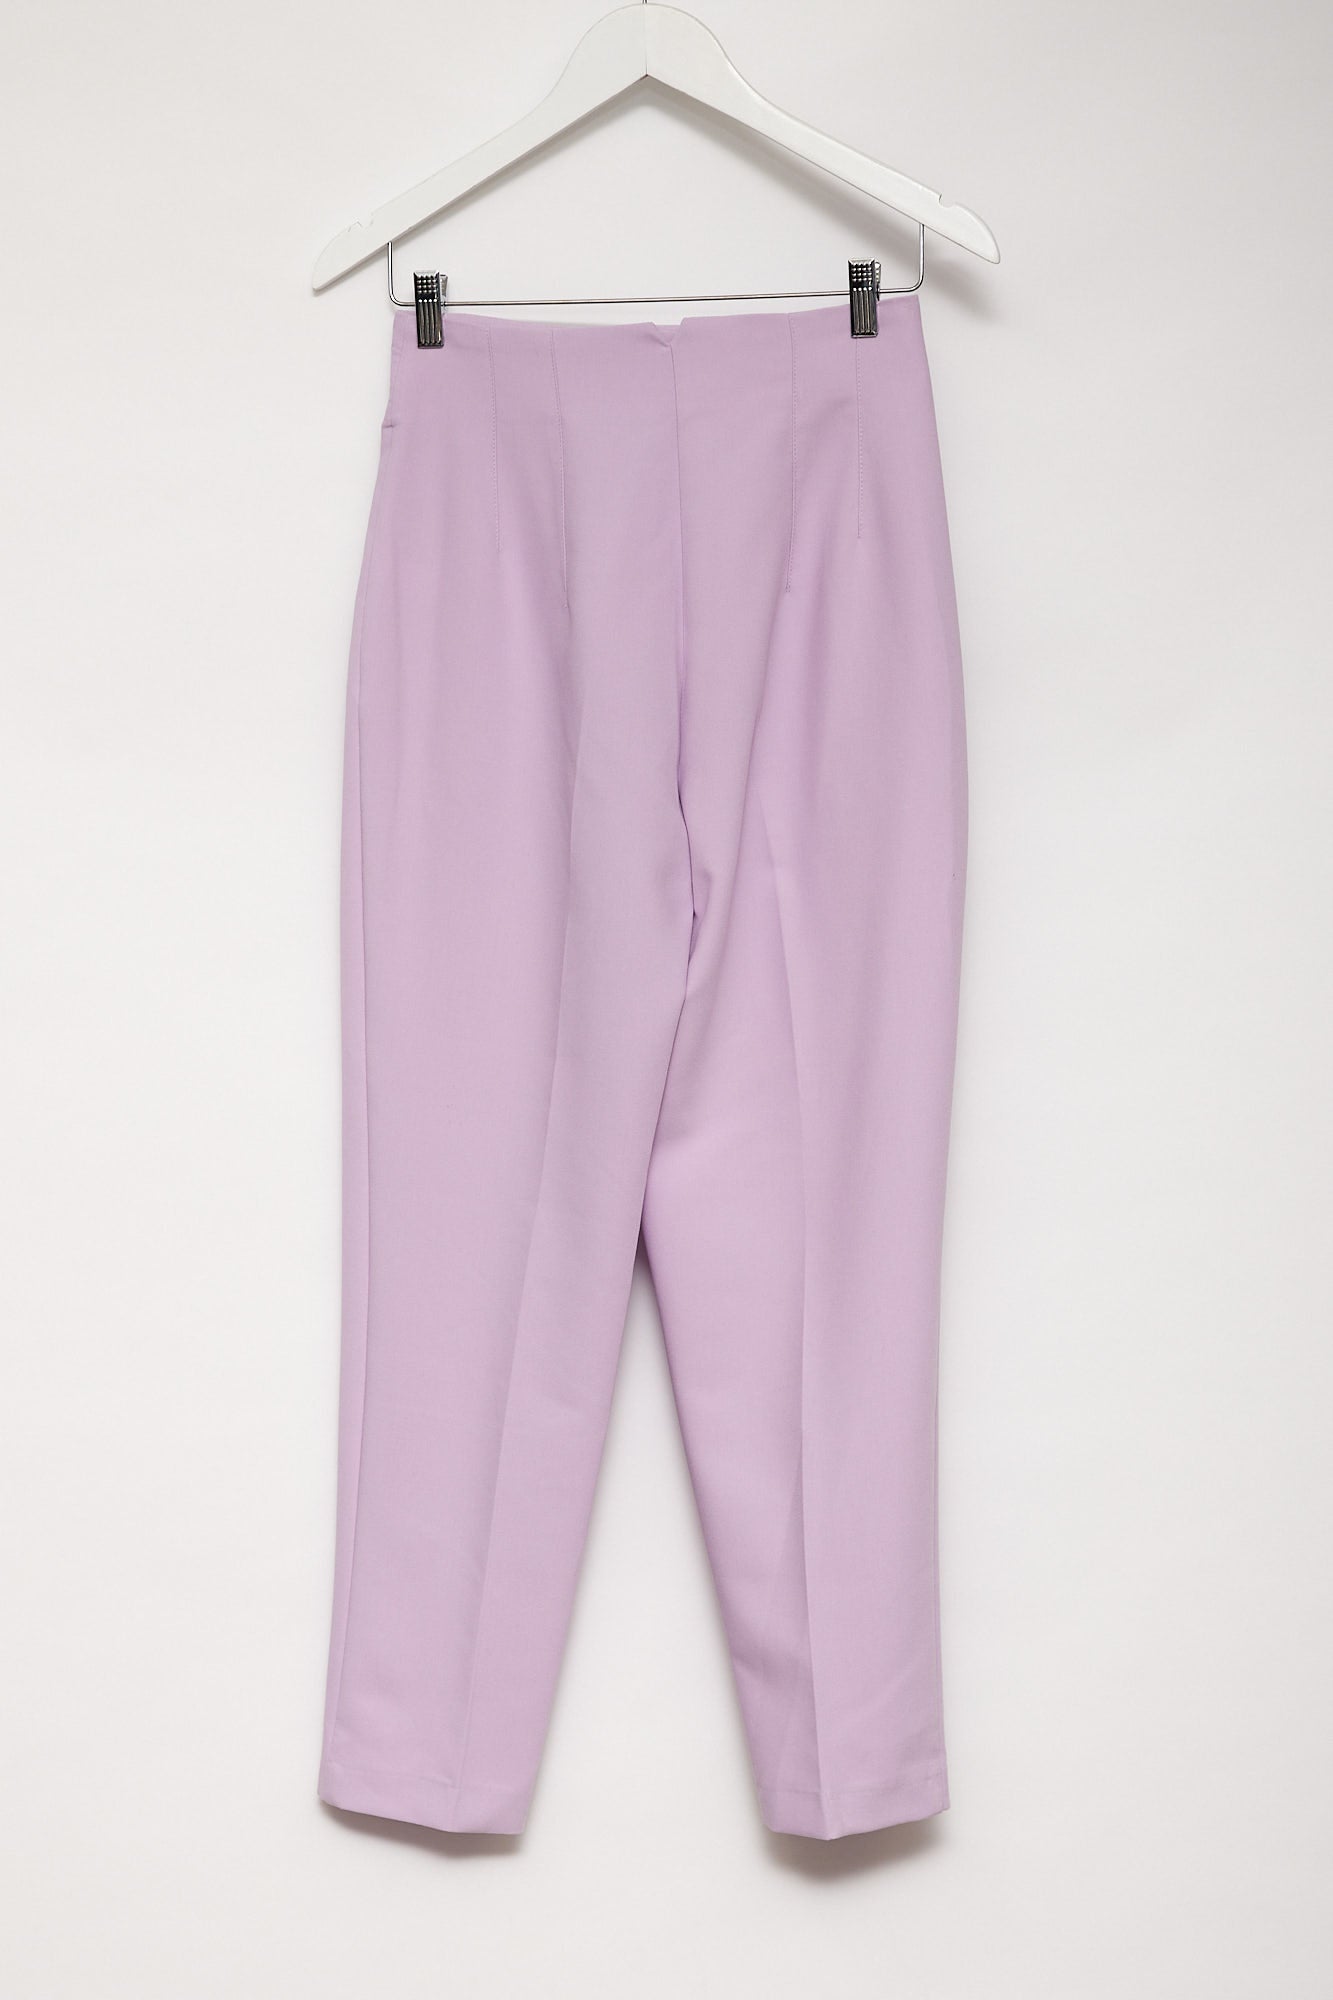 Womens Zara Lilac high waisted trouser size small